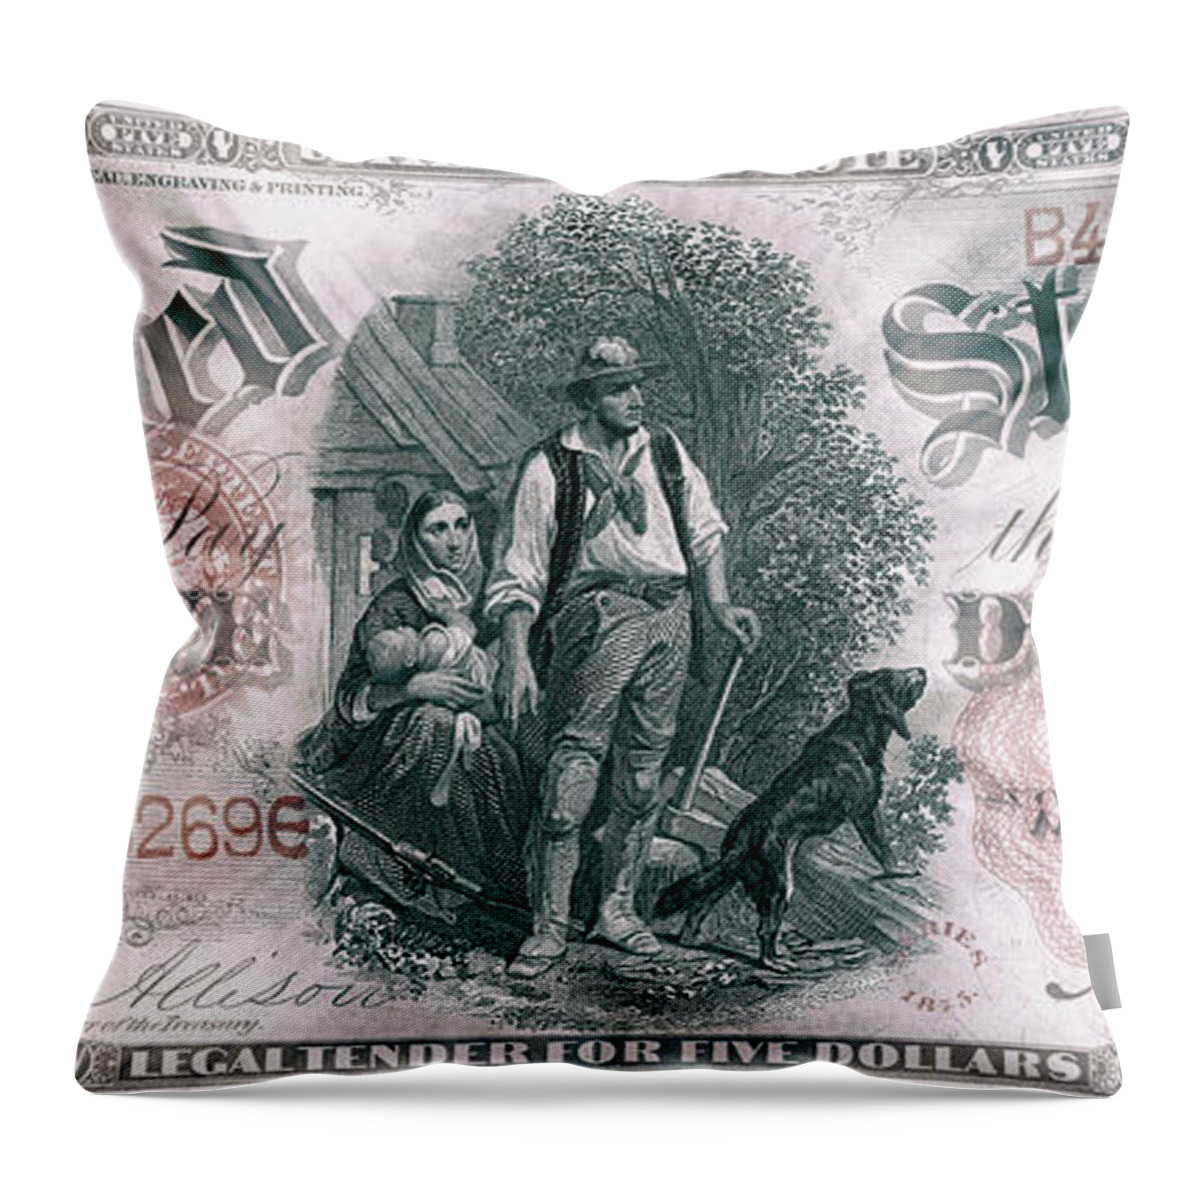 Travelpixpro Throw Pillow featuring the digital art Andrew Jackson 1875 Woodchopper American Five Dollar Bill Curreny Starburst Artwork by Shawn O'Brien